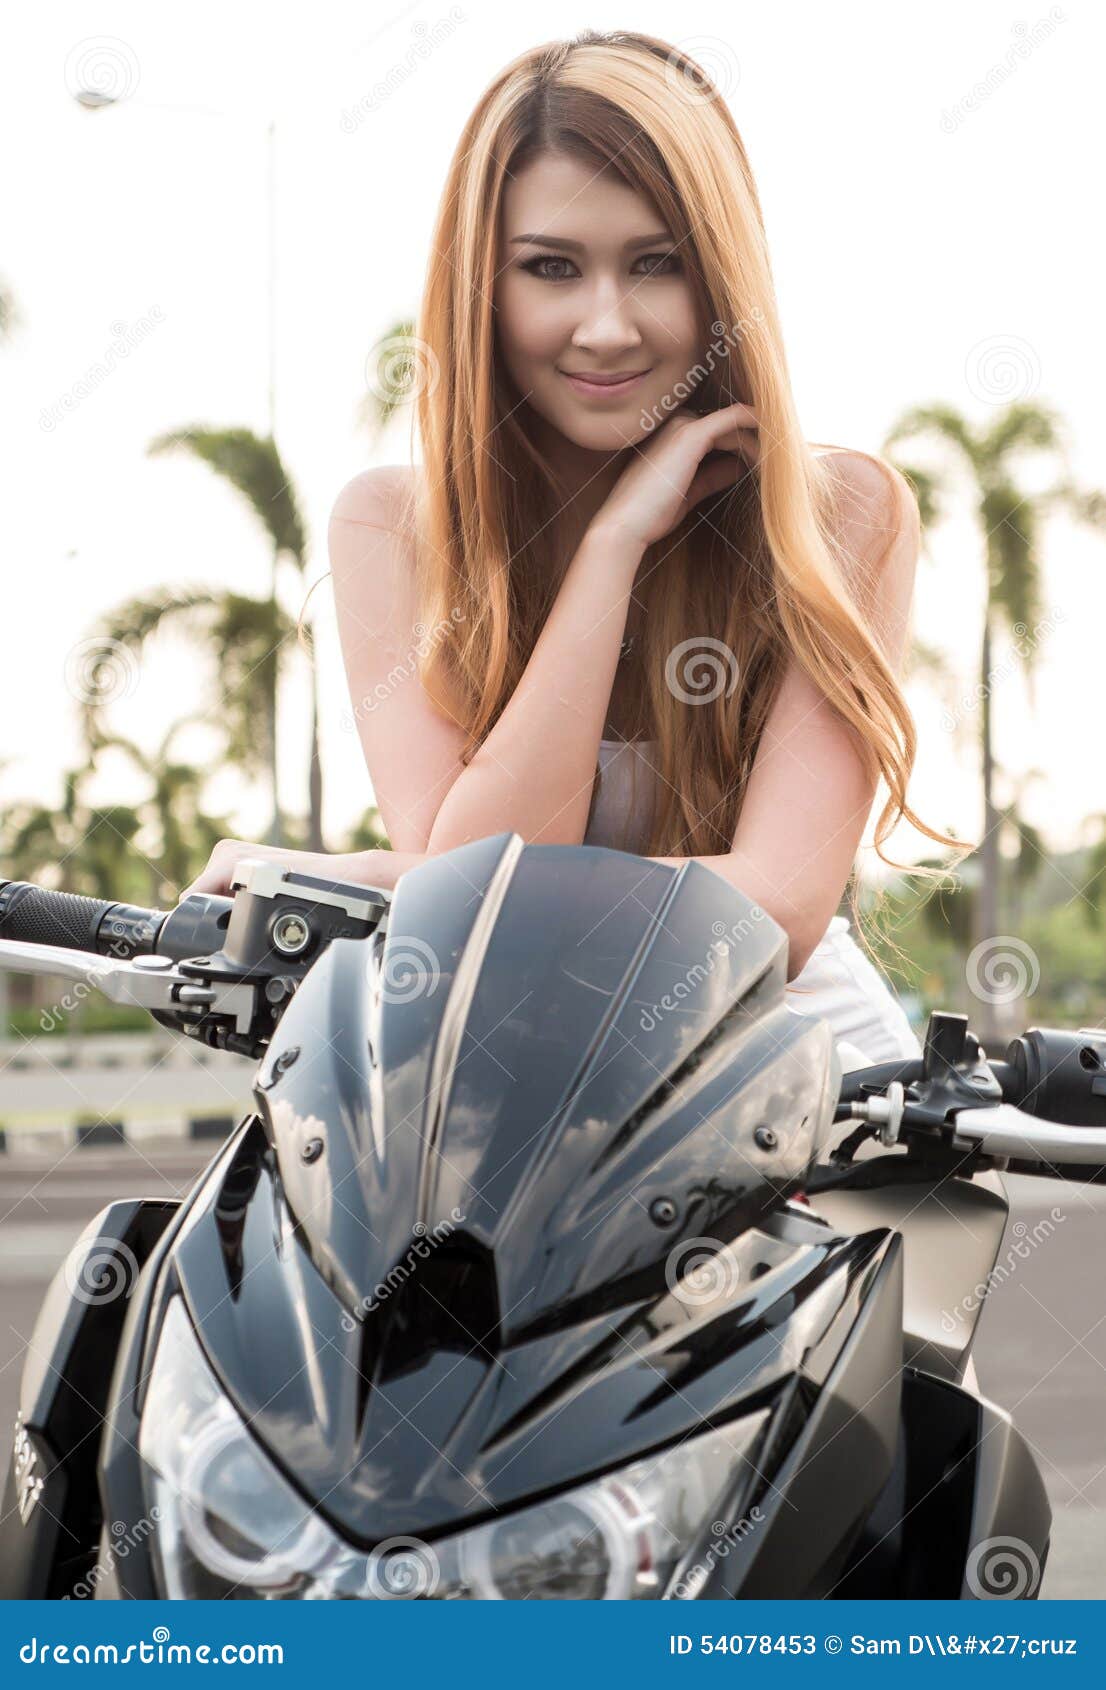 bailey knudson recommends naked chicks and motorcycles pic